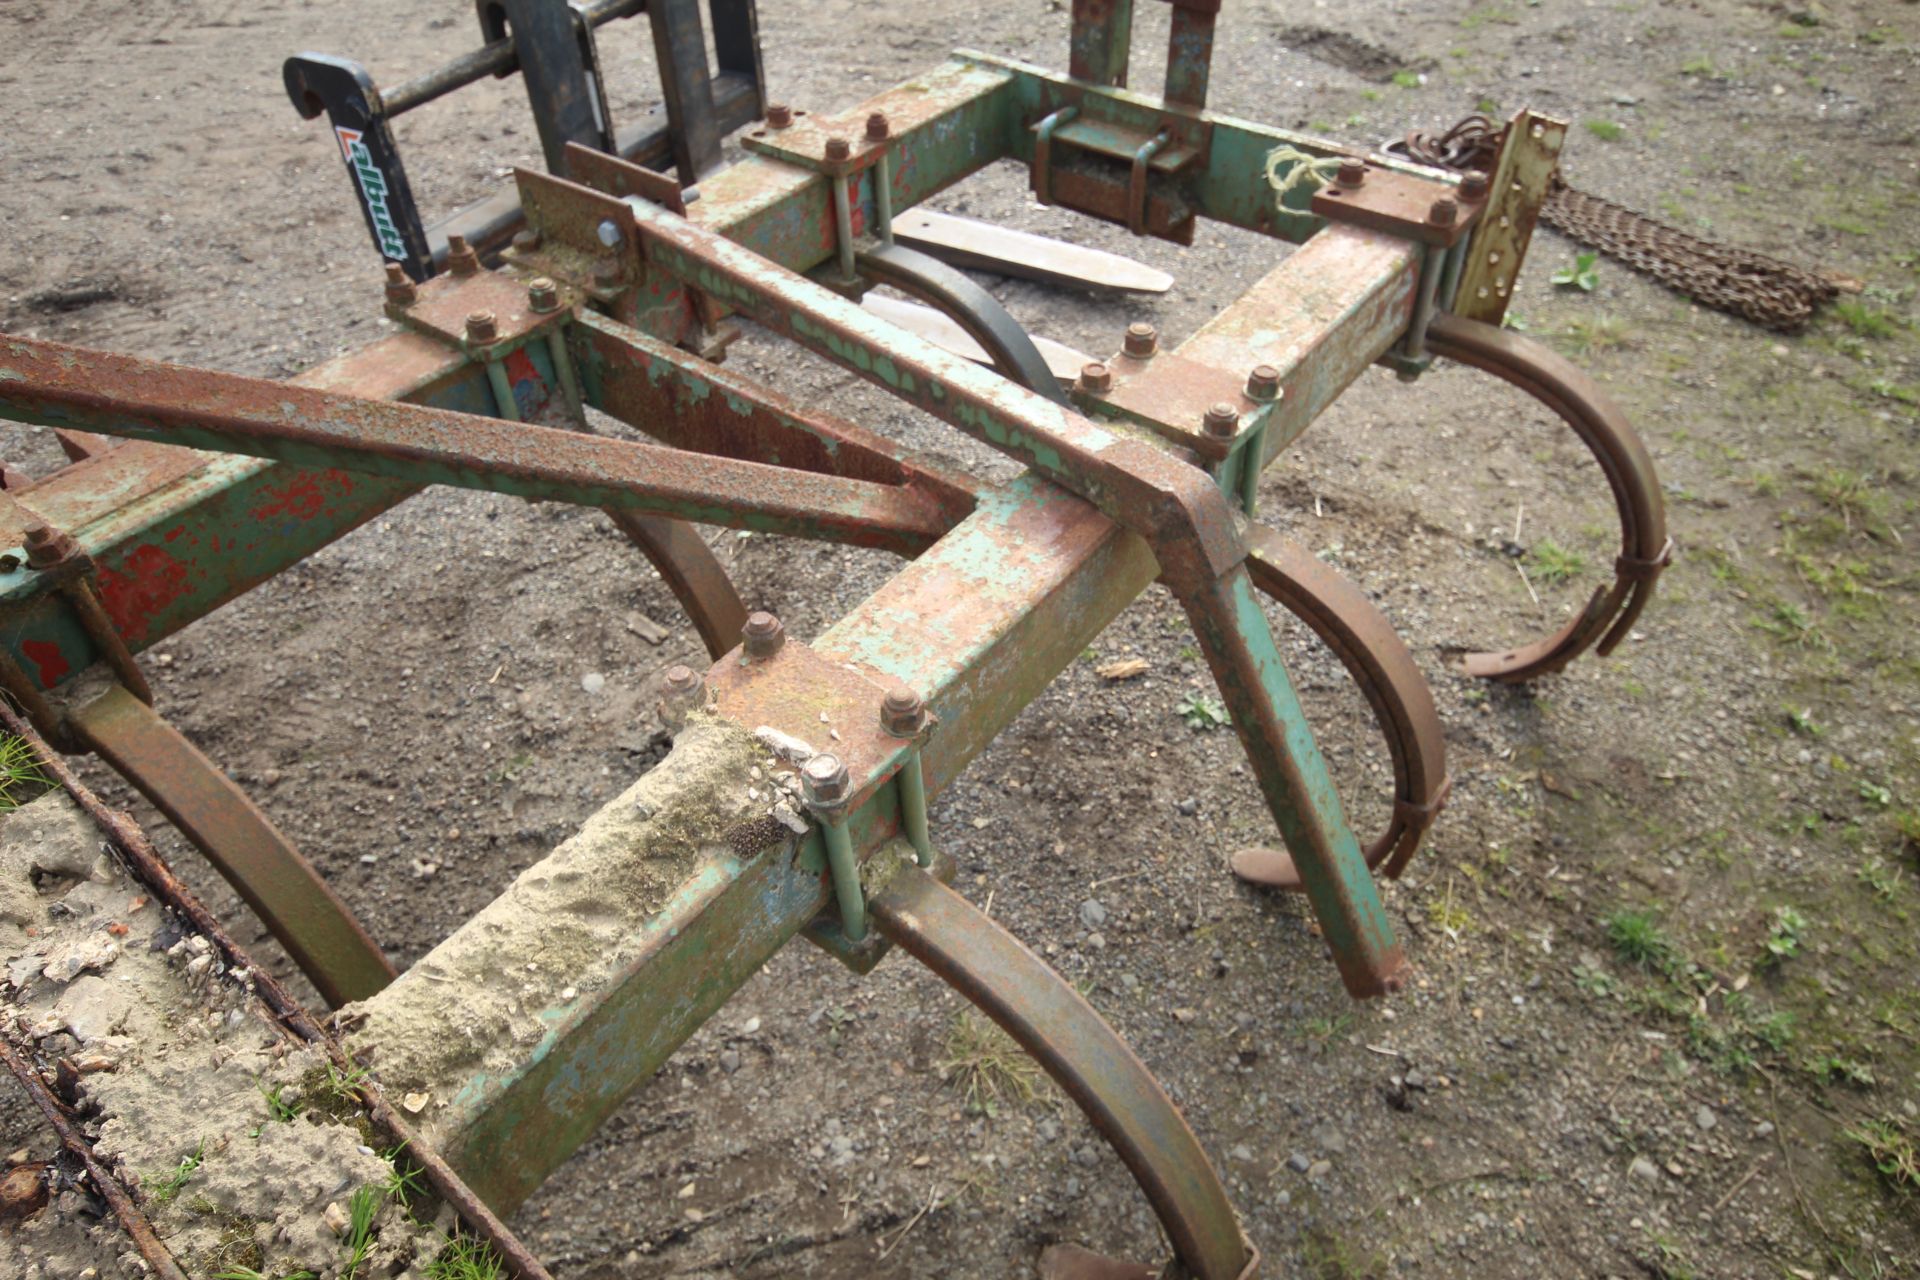 4m sprung tine cultivator. - Image 12 of 15